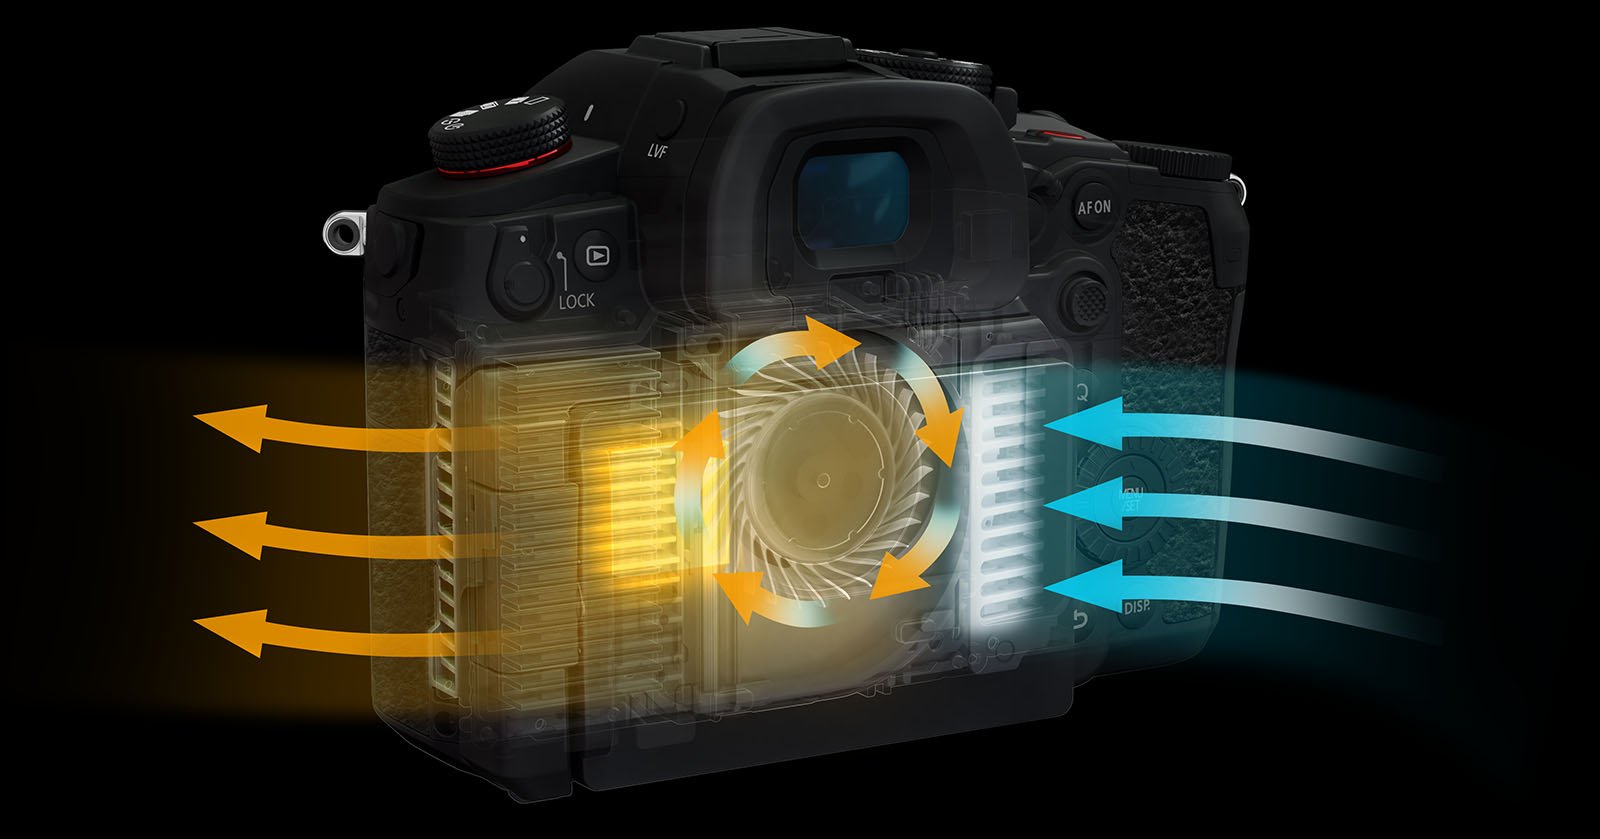 A digital camera is depicted with a transparent view showing an internal cooling system. Arrows indicate air flow: orange arrows represent warm air exiting and blue arrows show cool air entering the system, demonstrating the camera's cooling mechanism.